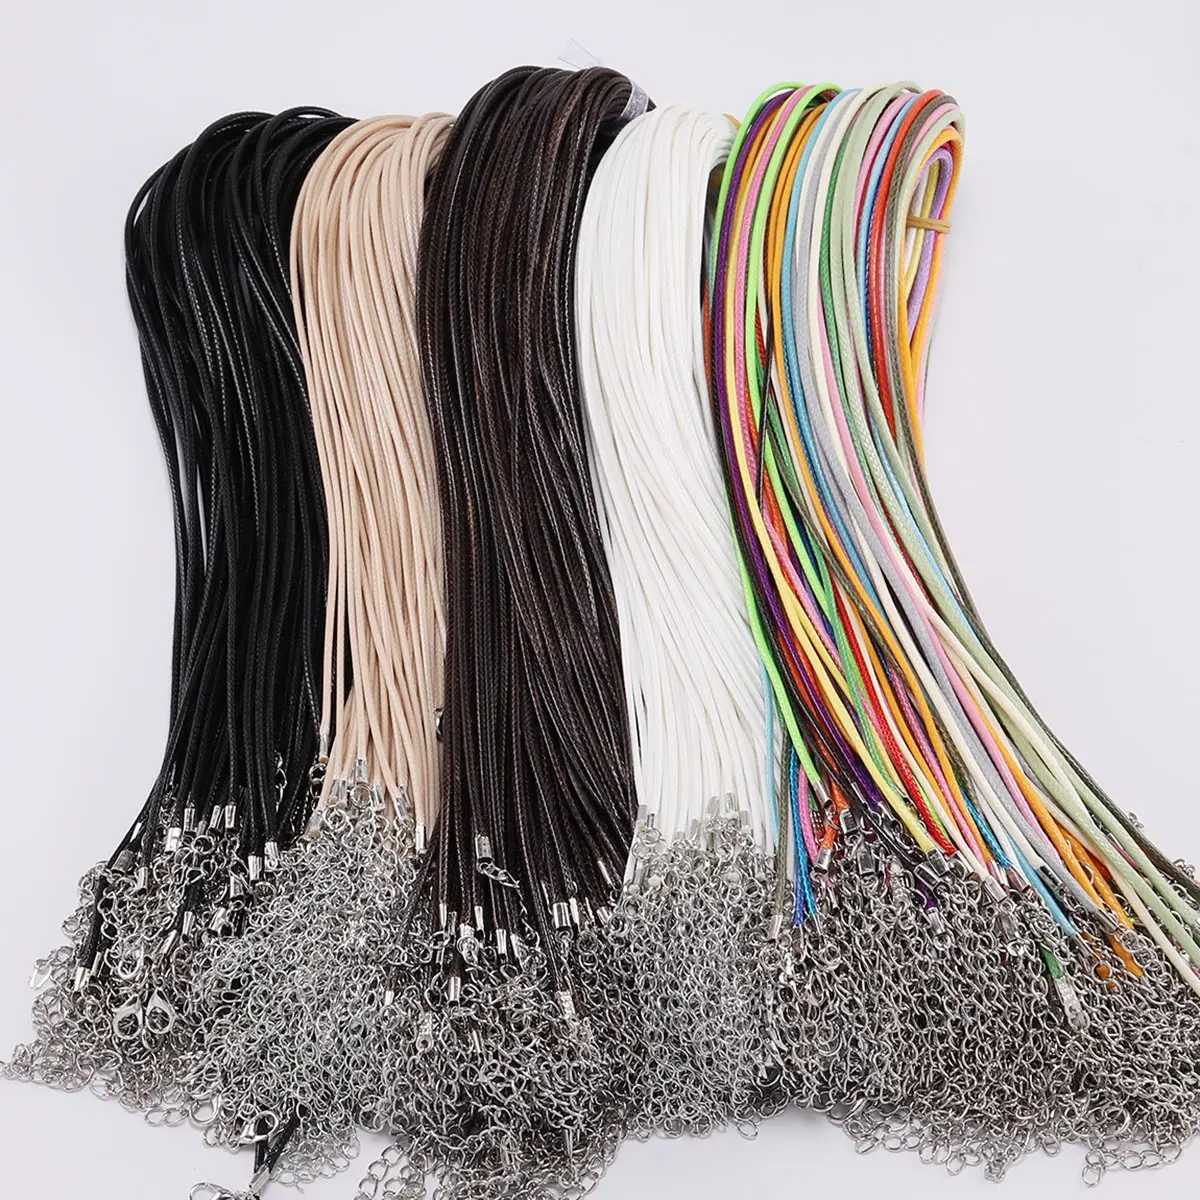 100Pcs/lot 1.5/2mm Leather String Cord Wax Braid Rope Adjustable Chain Lobster Clasp Wax Rope Necklaces Pendant Jewelry Findings